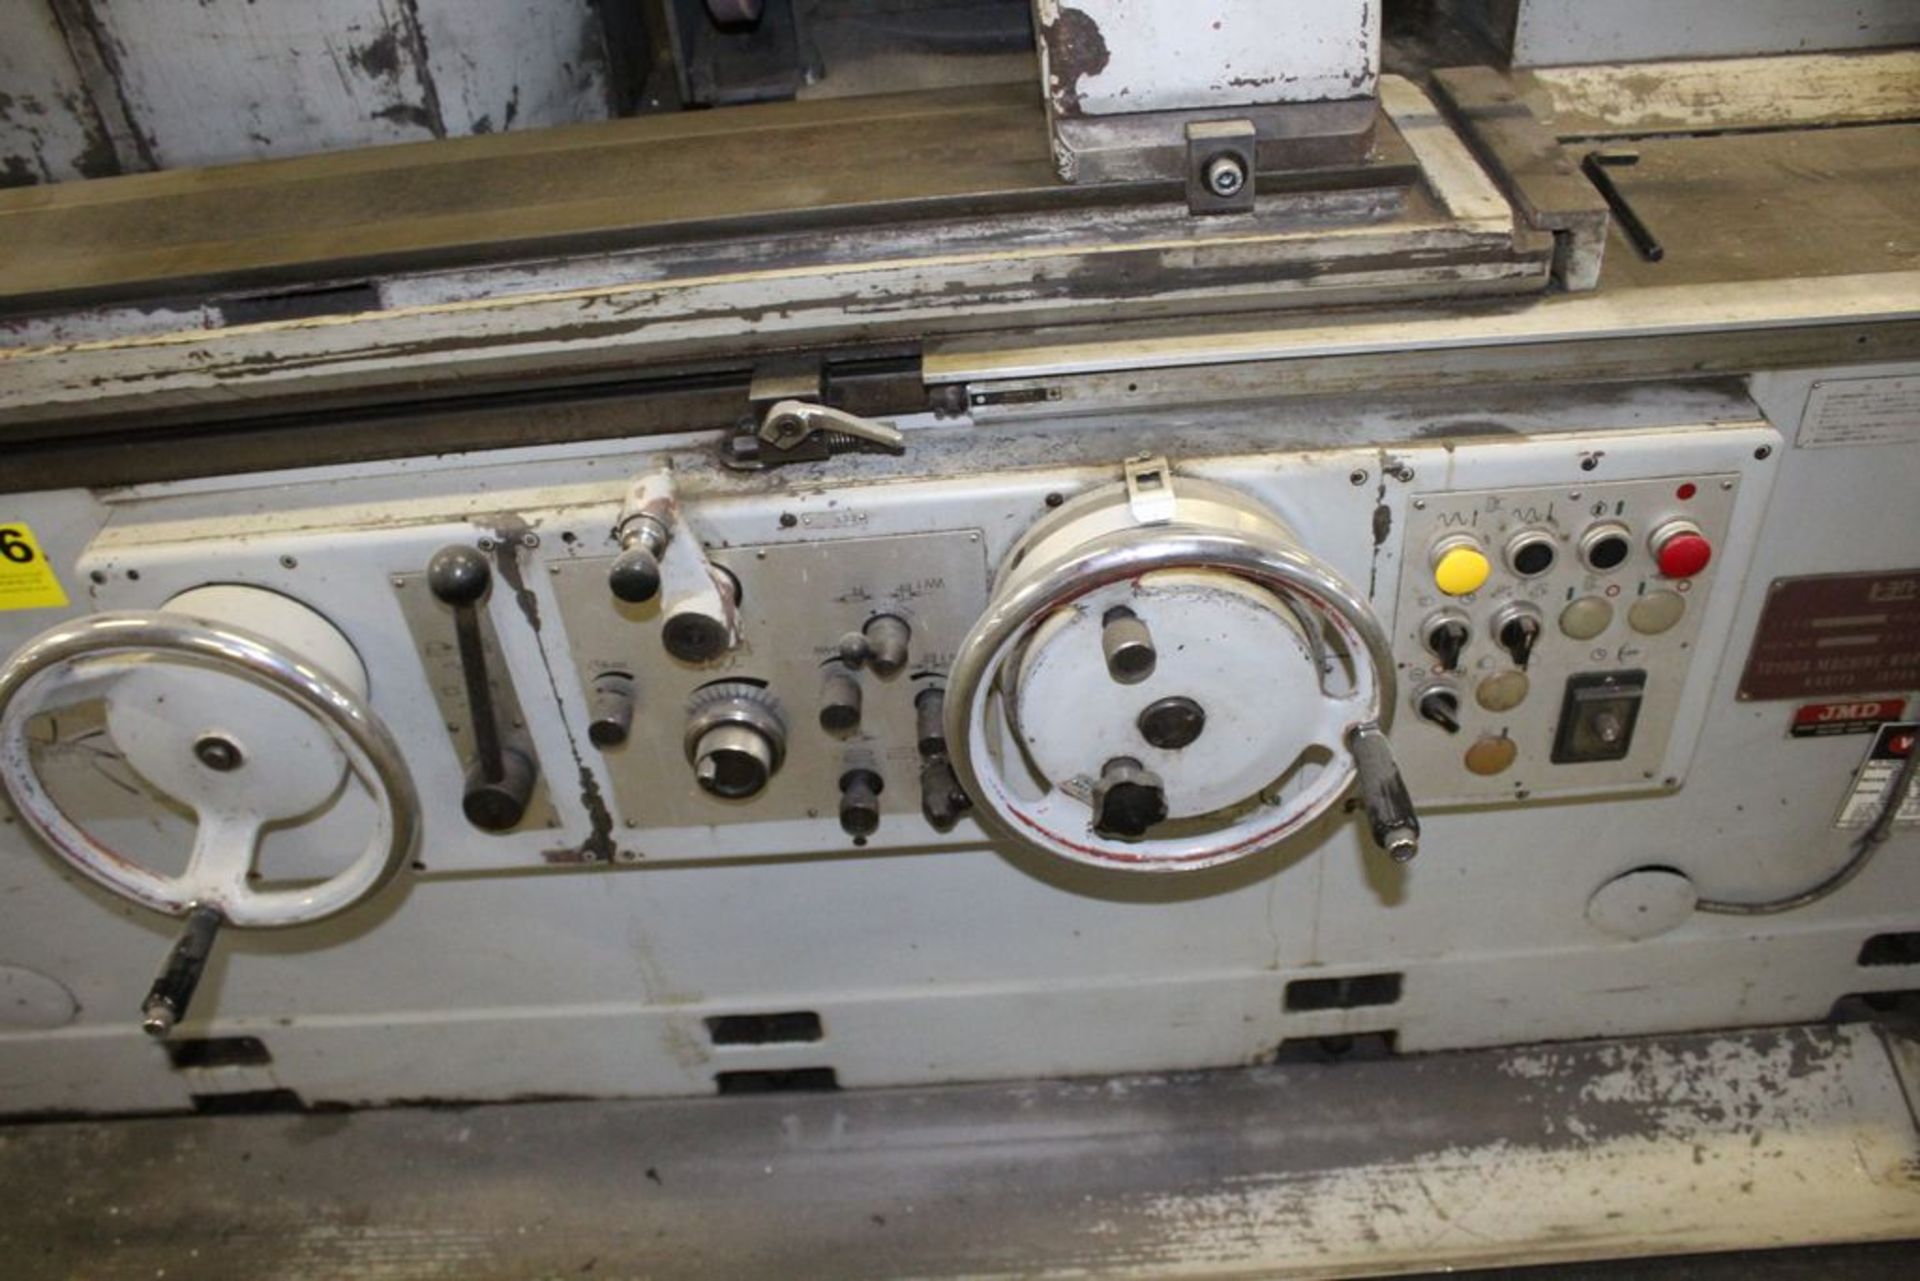 TOYODA 12öX60ö MODEL GOP32X150 PLAIN CYLINDRICAL GRINDER, S/N LG3287-2, WITH SONY READ OUT - Image 6 of 7